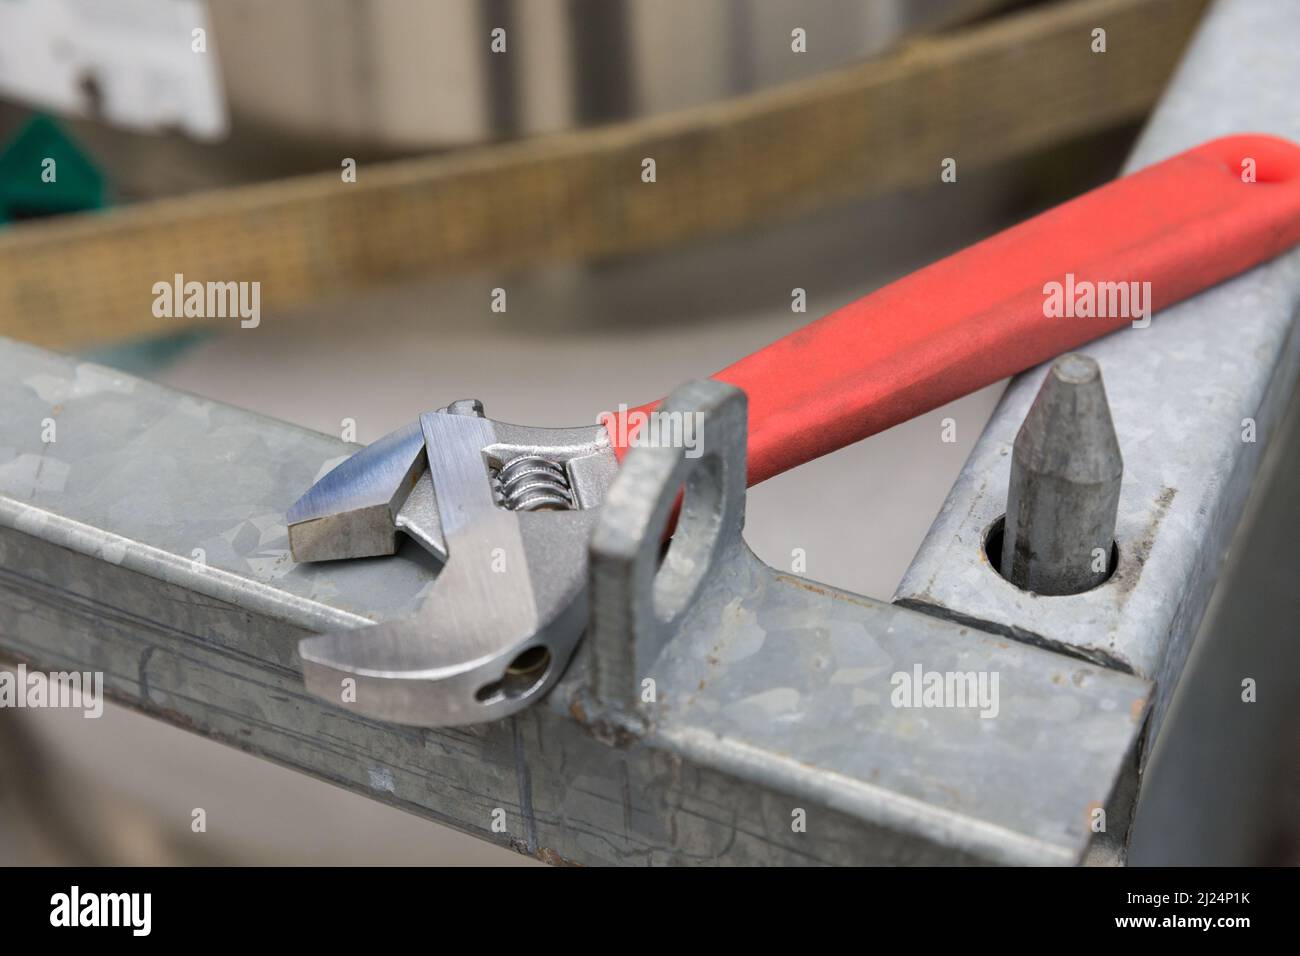 one wrench with red holder lying on metal structure Stock Photo